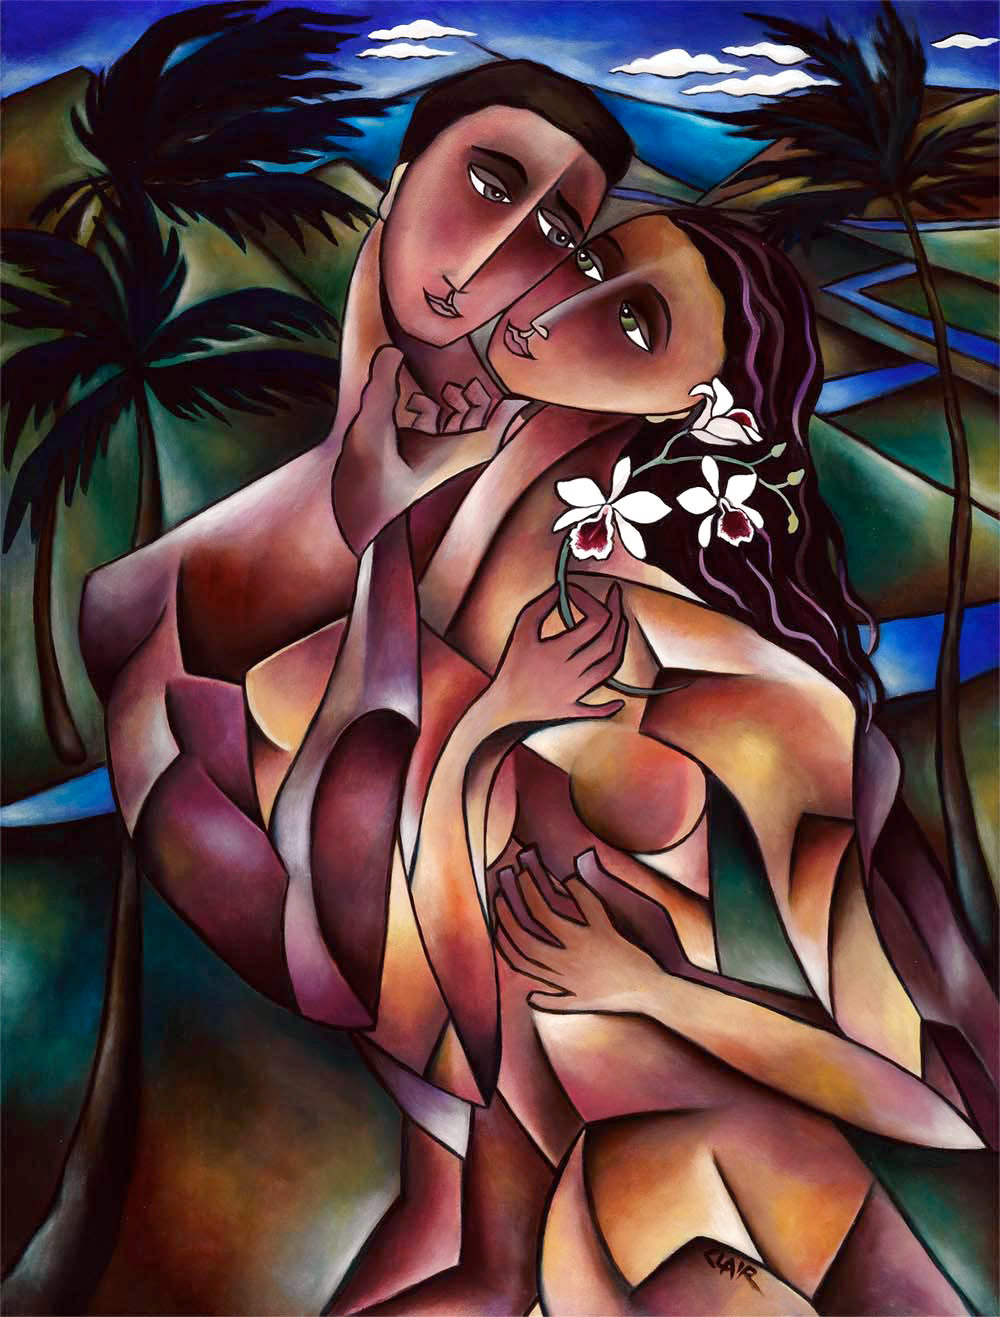 Lovers In Paradise by Stephanie Clair